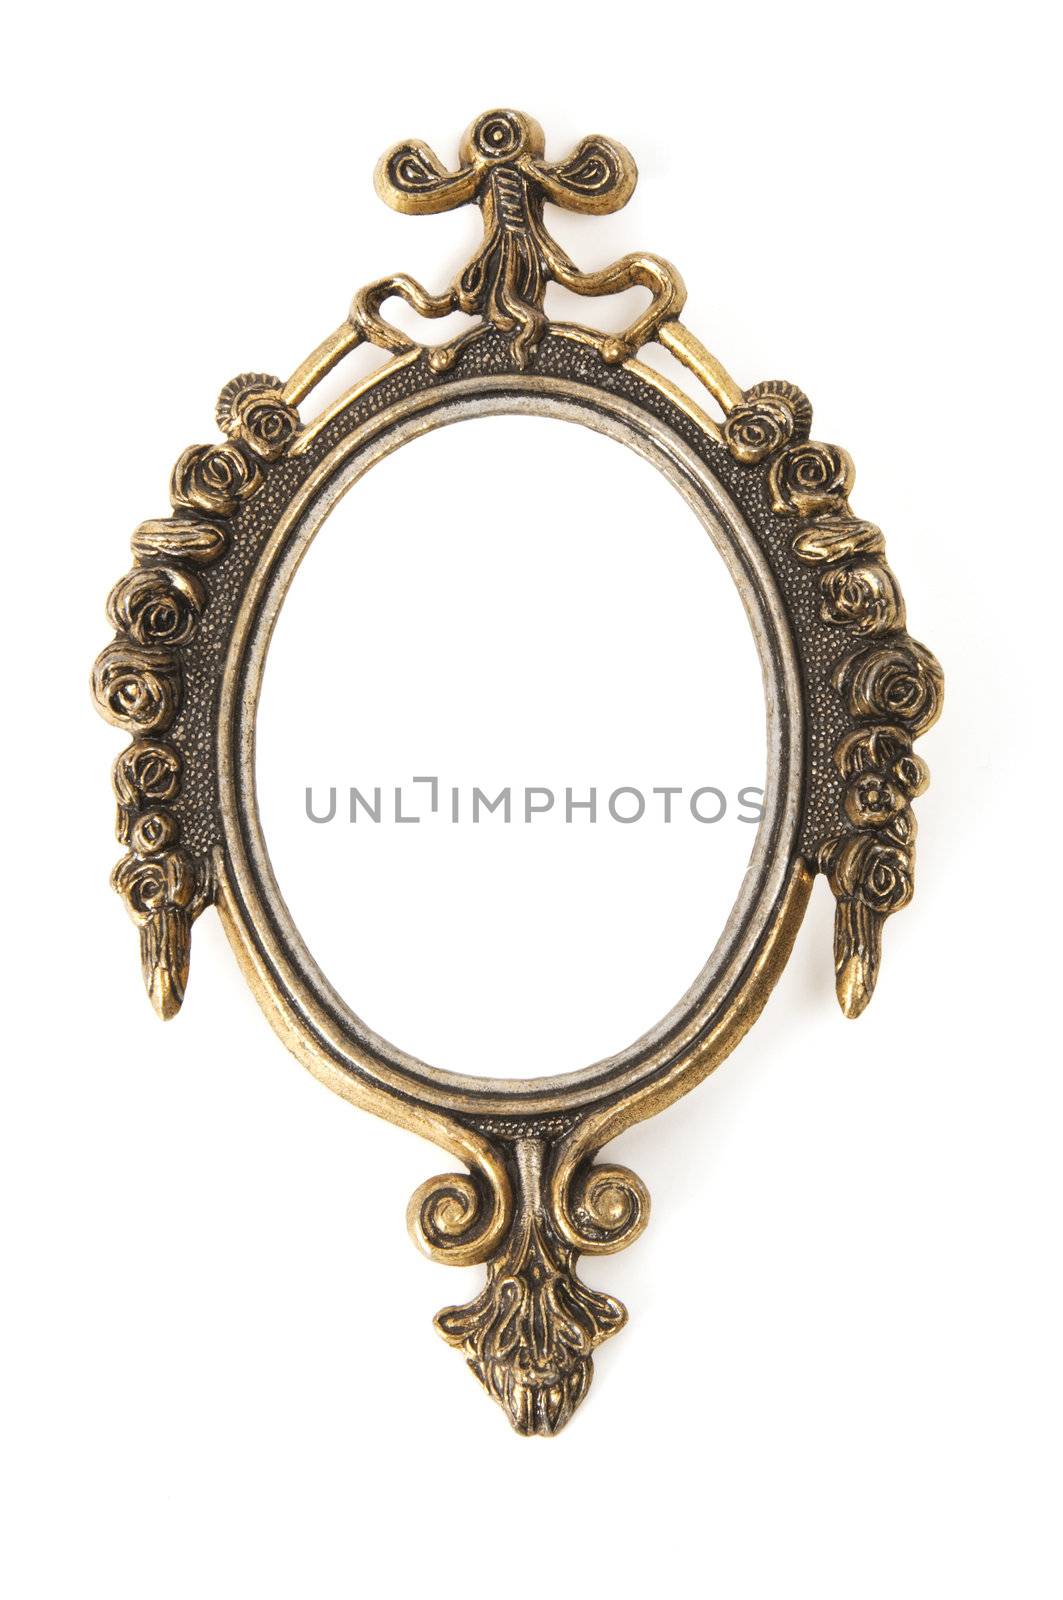 Brass antique circular frame isolated on white background - space for an illustration or photo